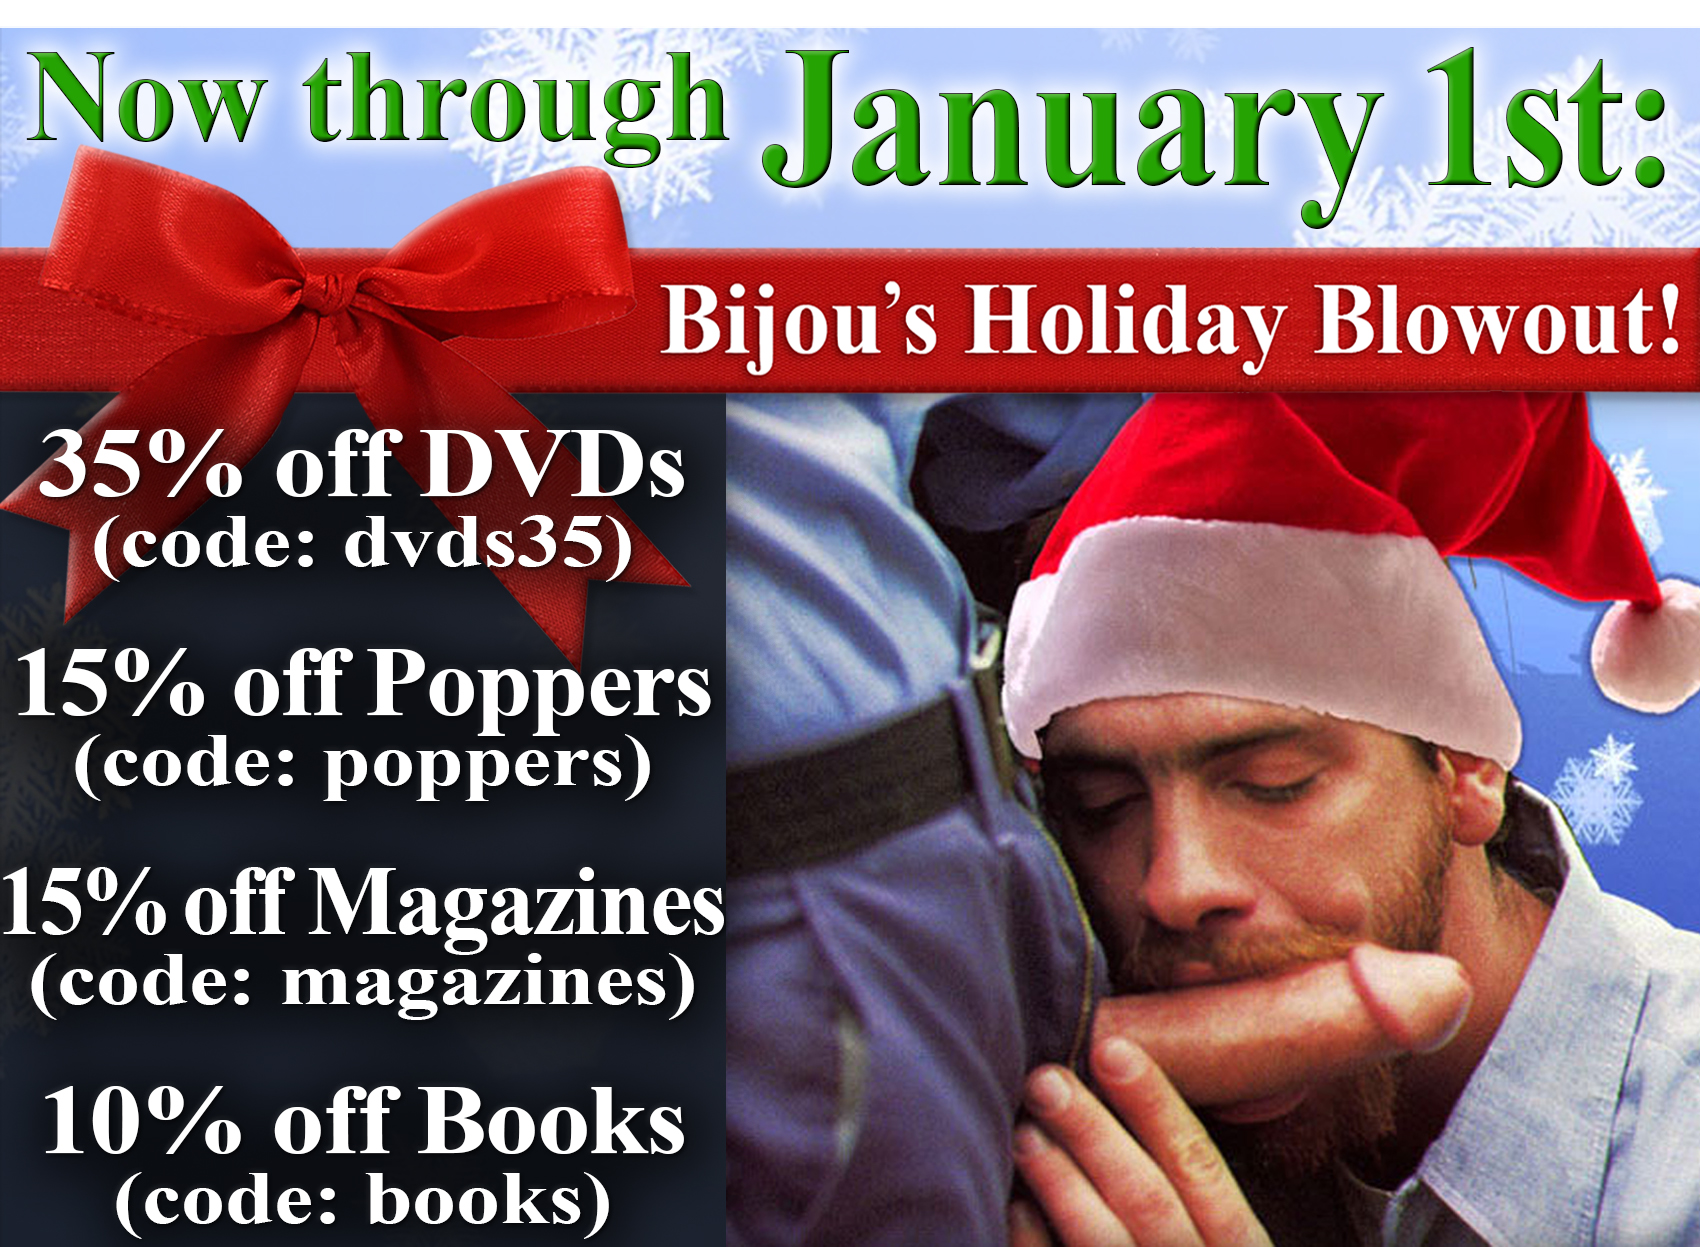 Holiday Sale - 35% off DVDs, 15% off Poppers and Magazines, 10% off Books through January 1st